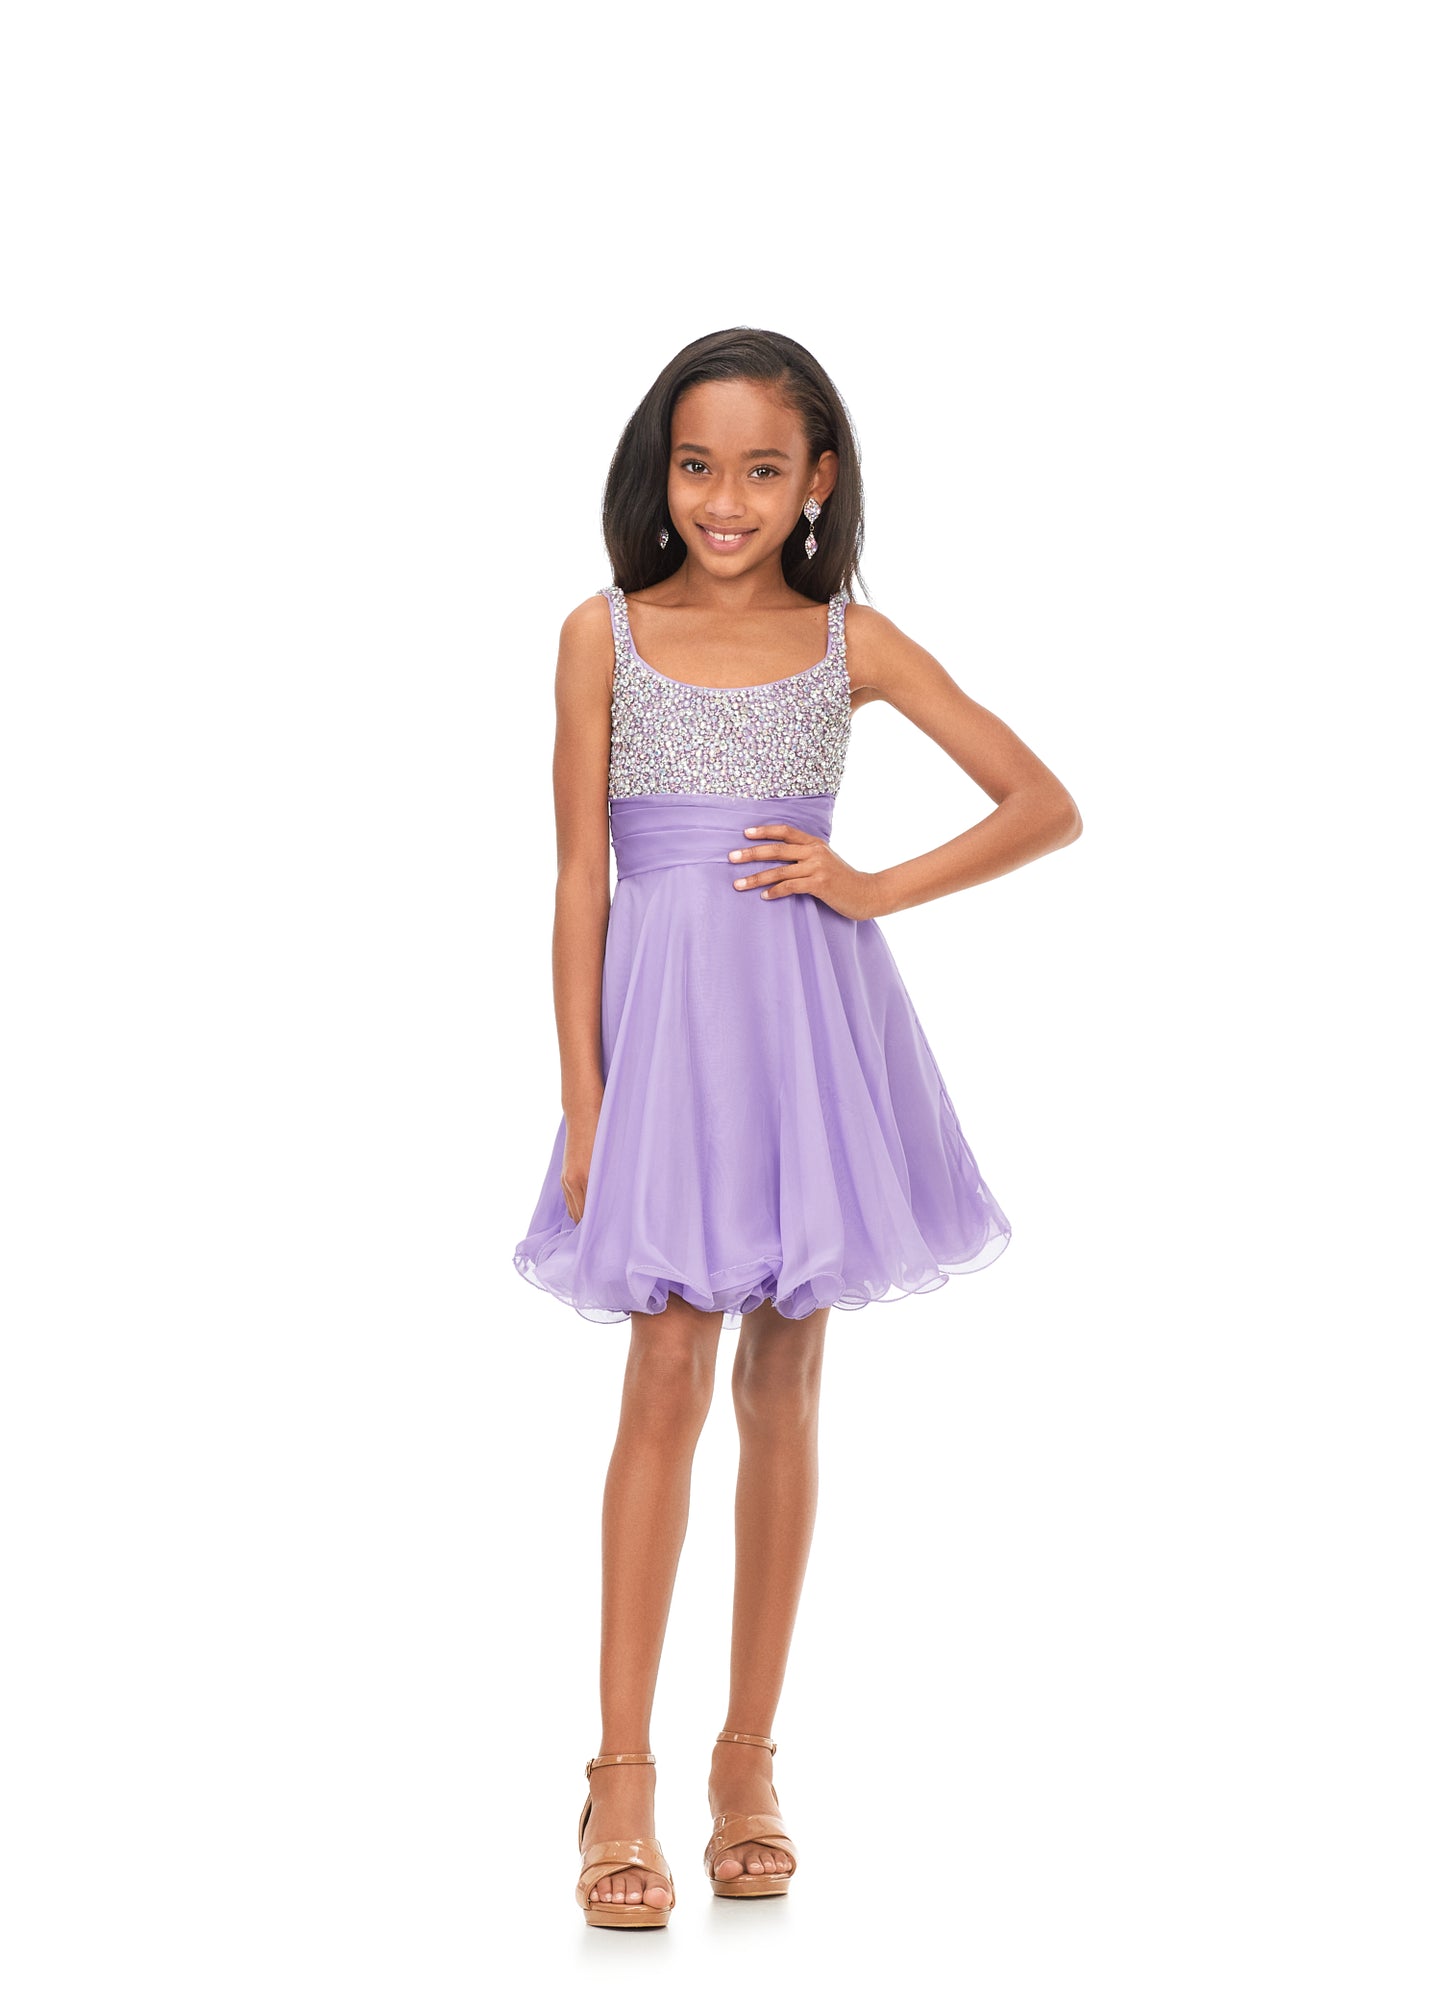 Ashley Lauren Kids 8160 Girls A-Line Cocktail Dress with Crystal Beaded Bustier  This a-line chiffon cocktail gown features a beaded bustier top and ruched waist detail for the perfect, fun look!  Scoop Neckline Beaded Bustier A-Line Skirt Chiffon COLORS: Hot Pink, Ivory, Orchid